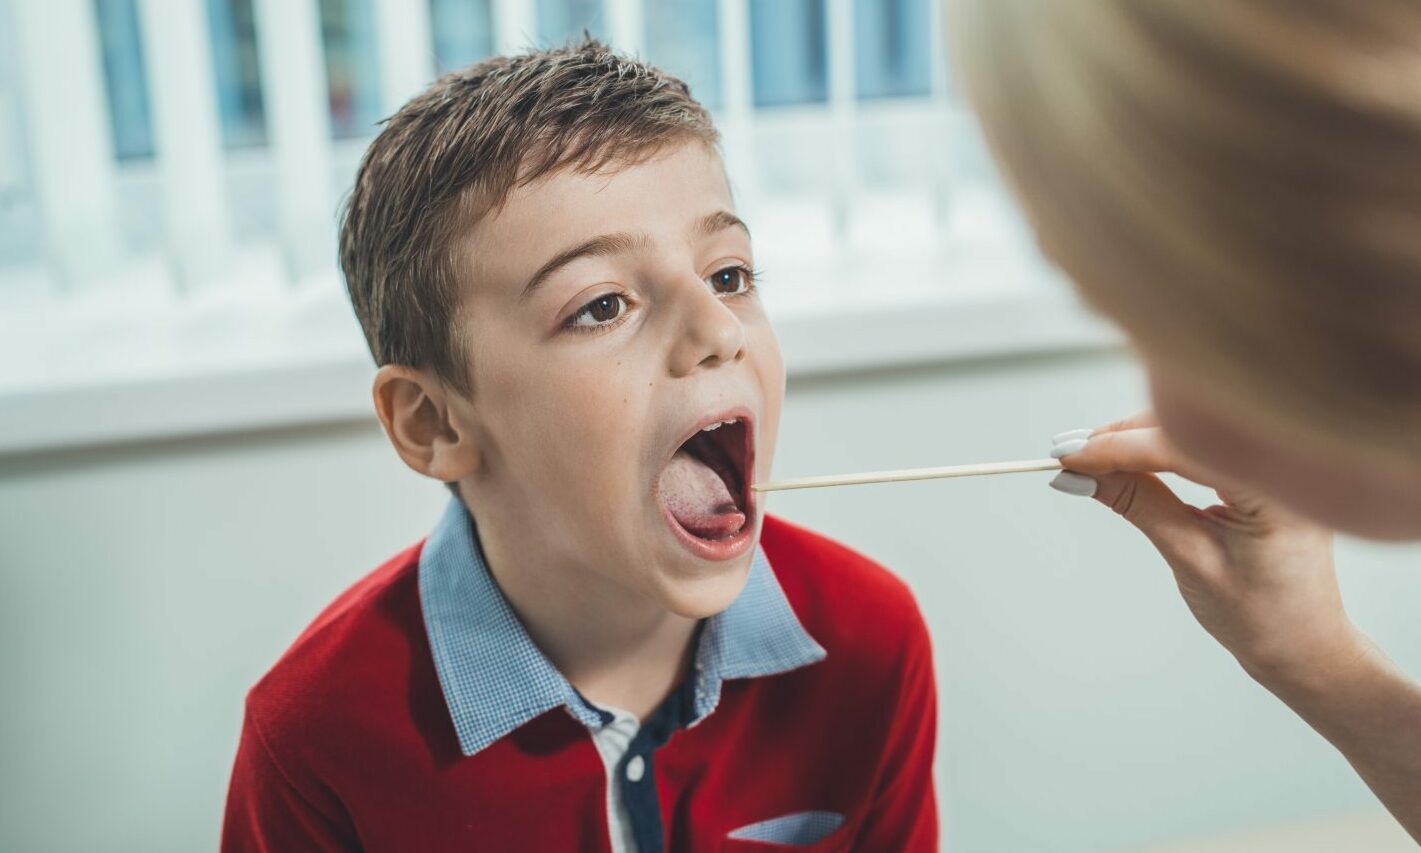 Parents have been advised on the symptoms of a strep Infection. Image: Shutterstock / Vasily Deyneka